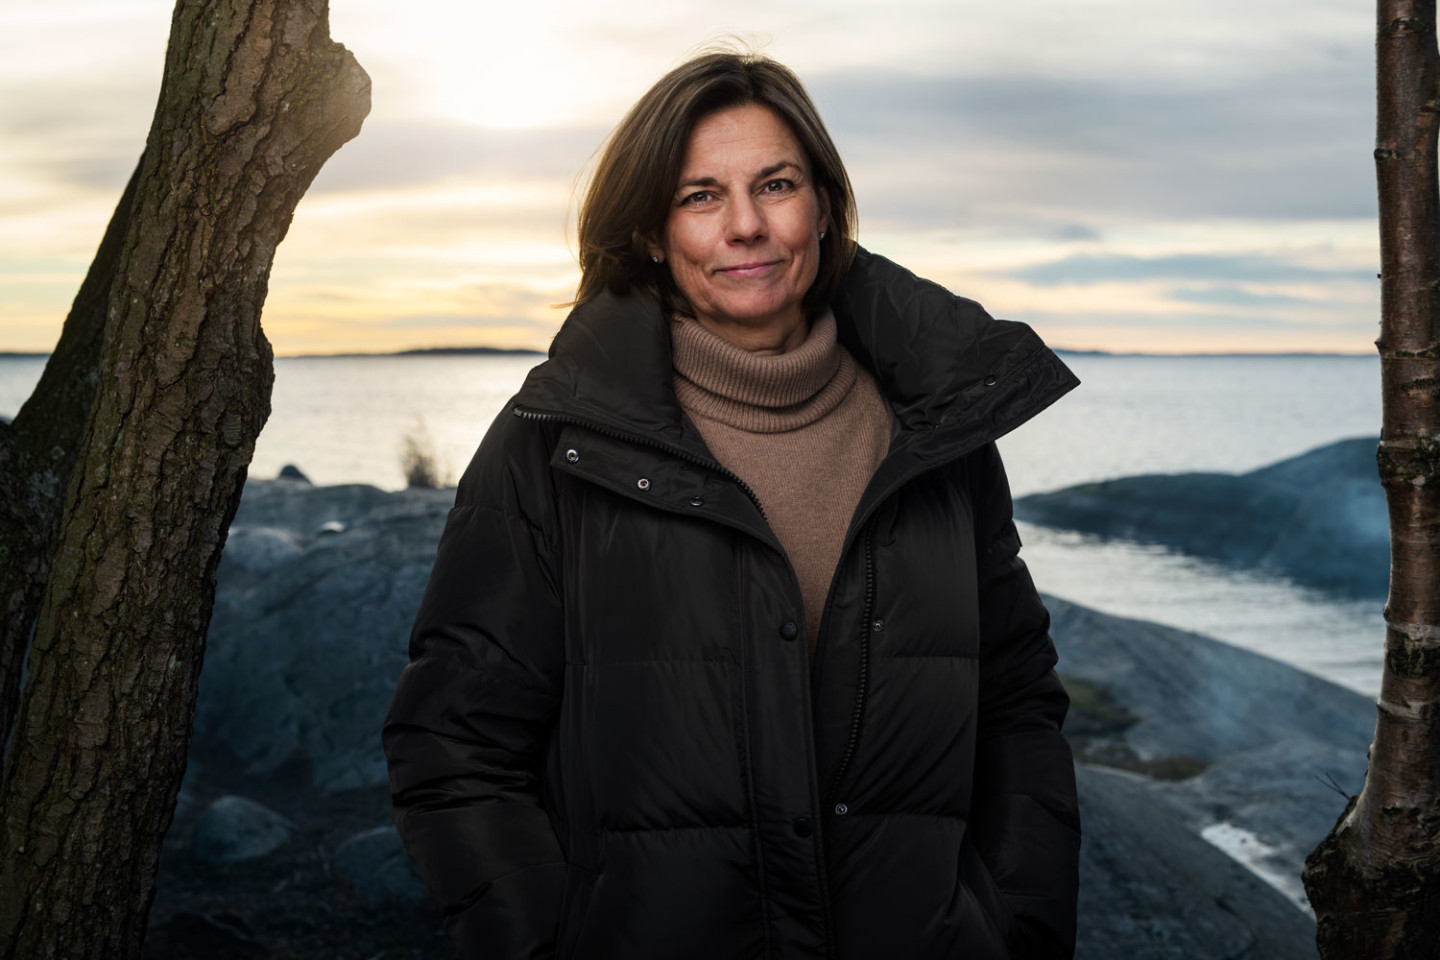 Portrait of former Minister of Climate and Environment Isabella Lövin. Wearing a quilted jacket outdoors.